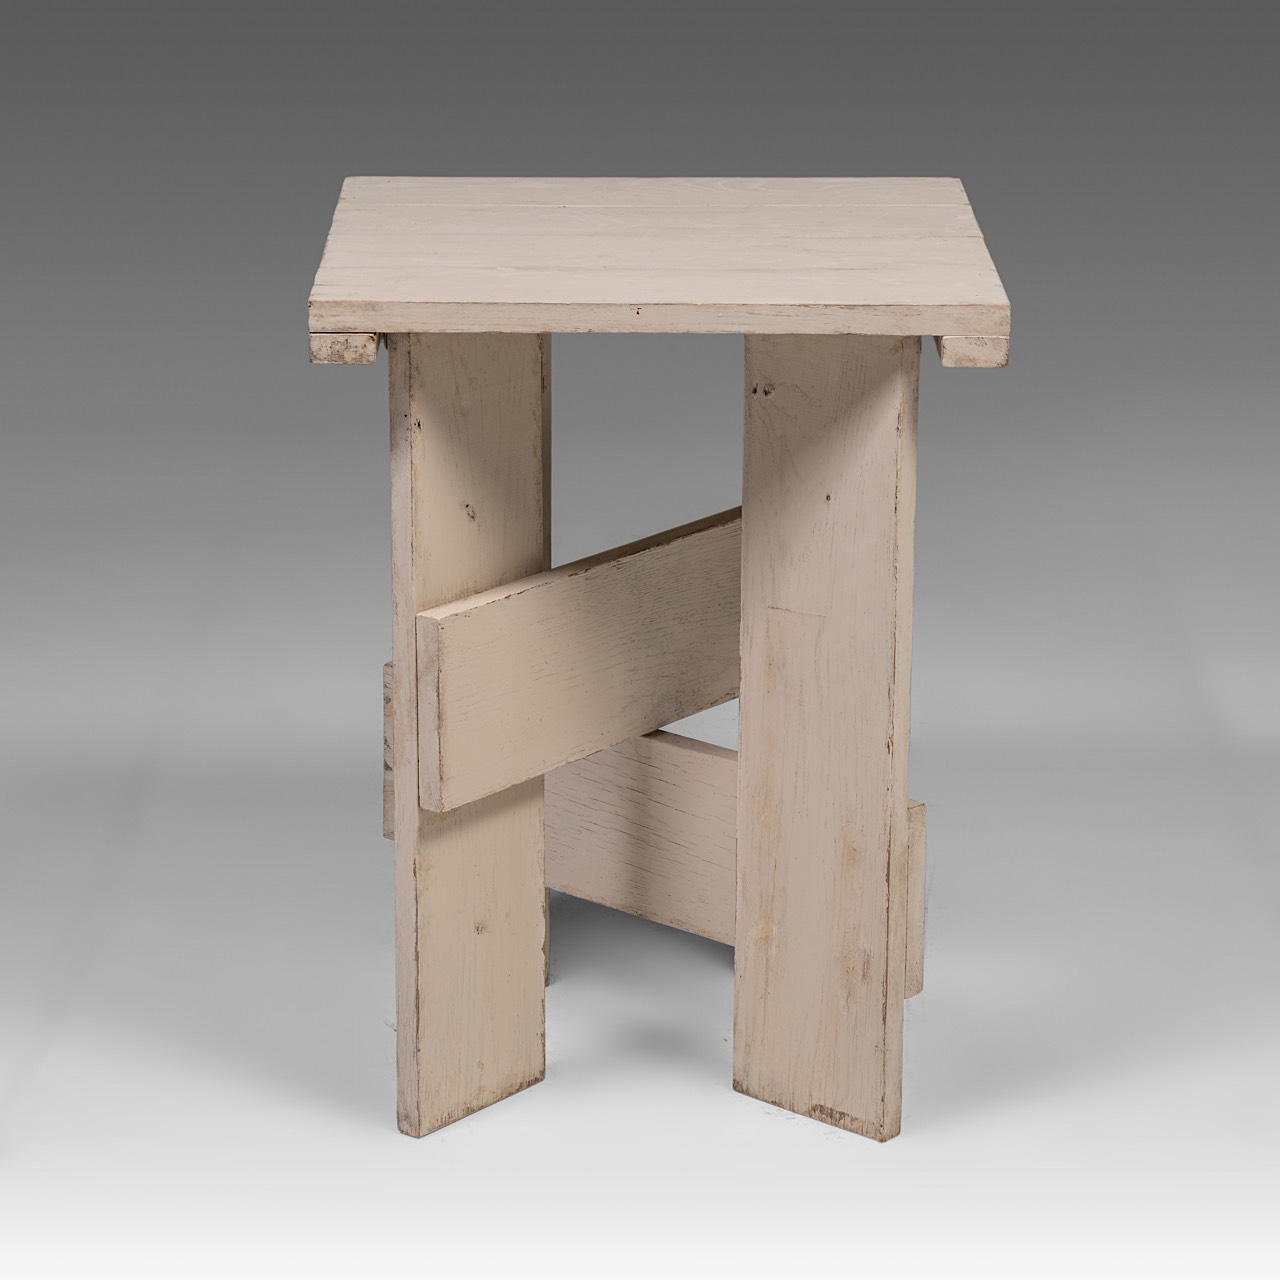 A decorative Low crate table after Gerrit Rietveld, H 63 - W 49 - D 47 cm - Image 3 of 7